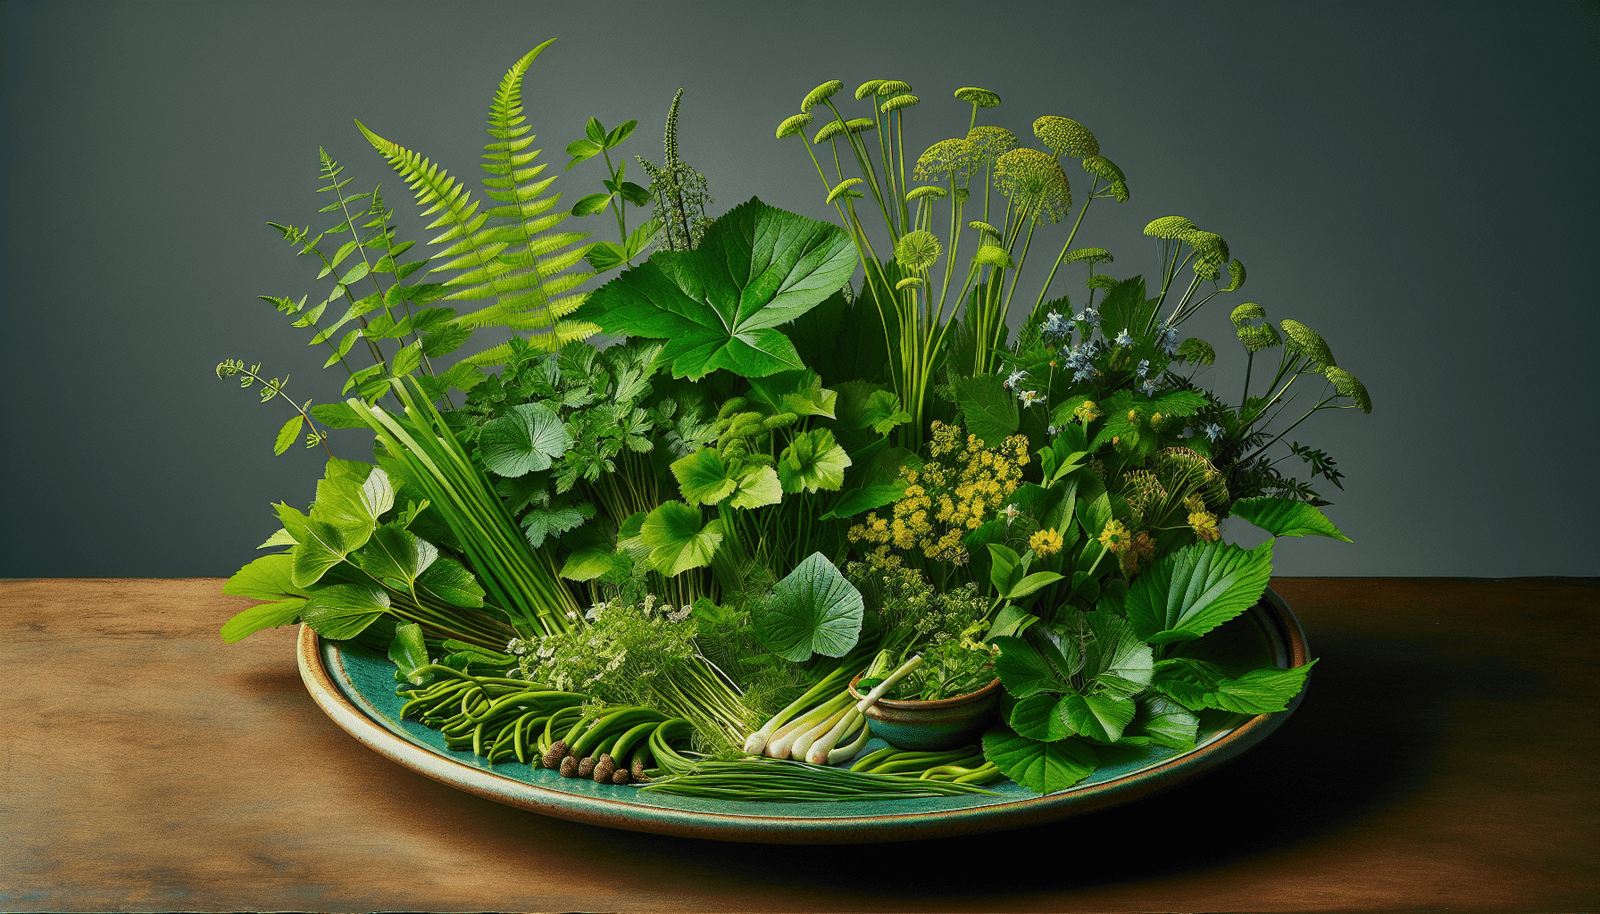 How Does The Use Of Wild Greens And Foraged Ingredients Contribute To Korean Cuisine?